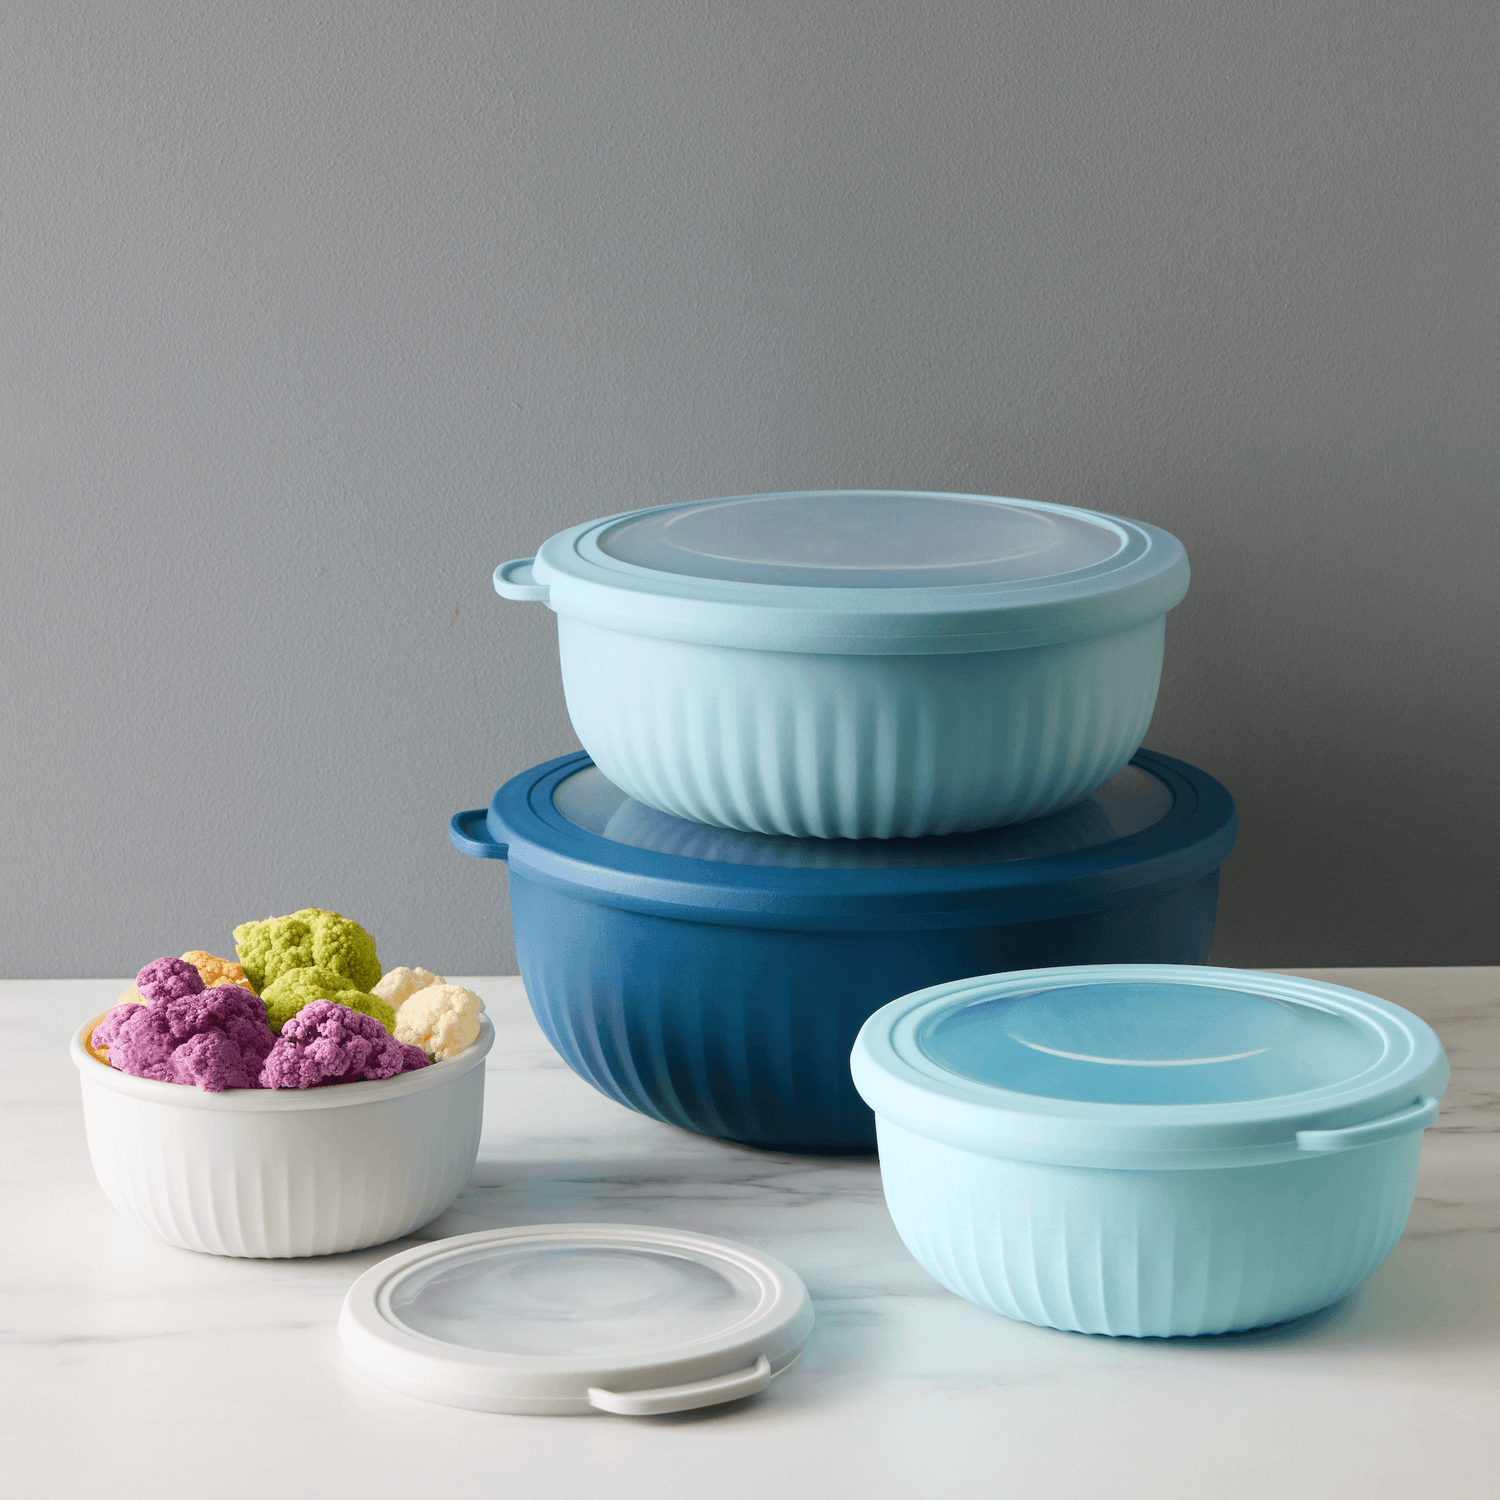 Cook with Color Mixing Bowls - 4 Piece Nesting Plastic Mixing Bowl Set with Pour Spouts and Handles (Ombre Blue)